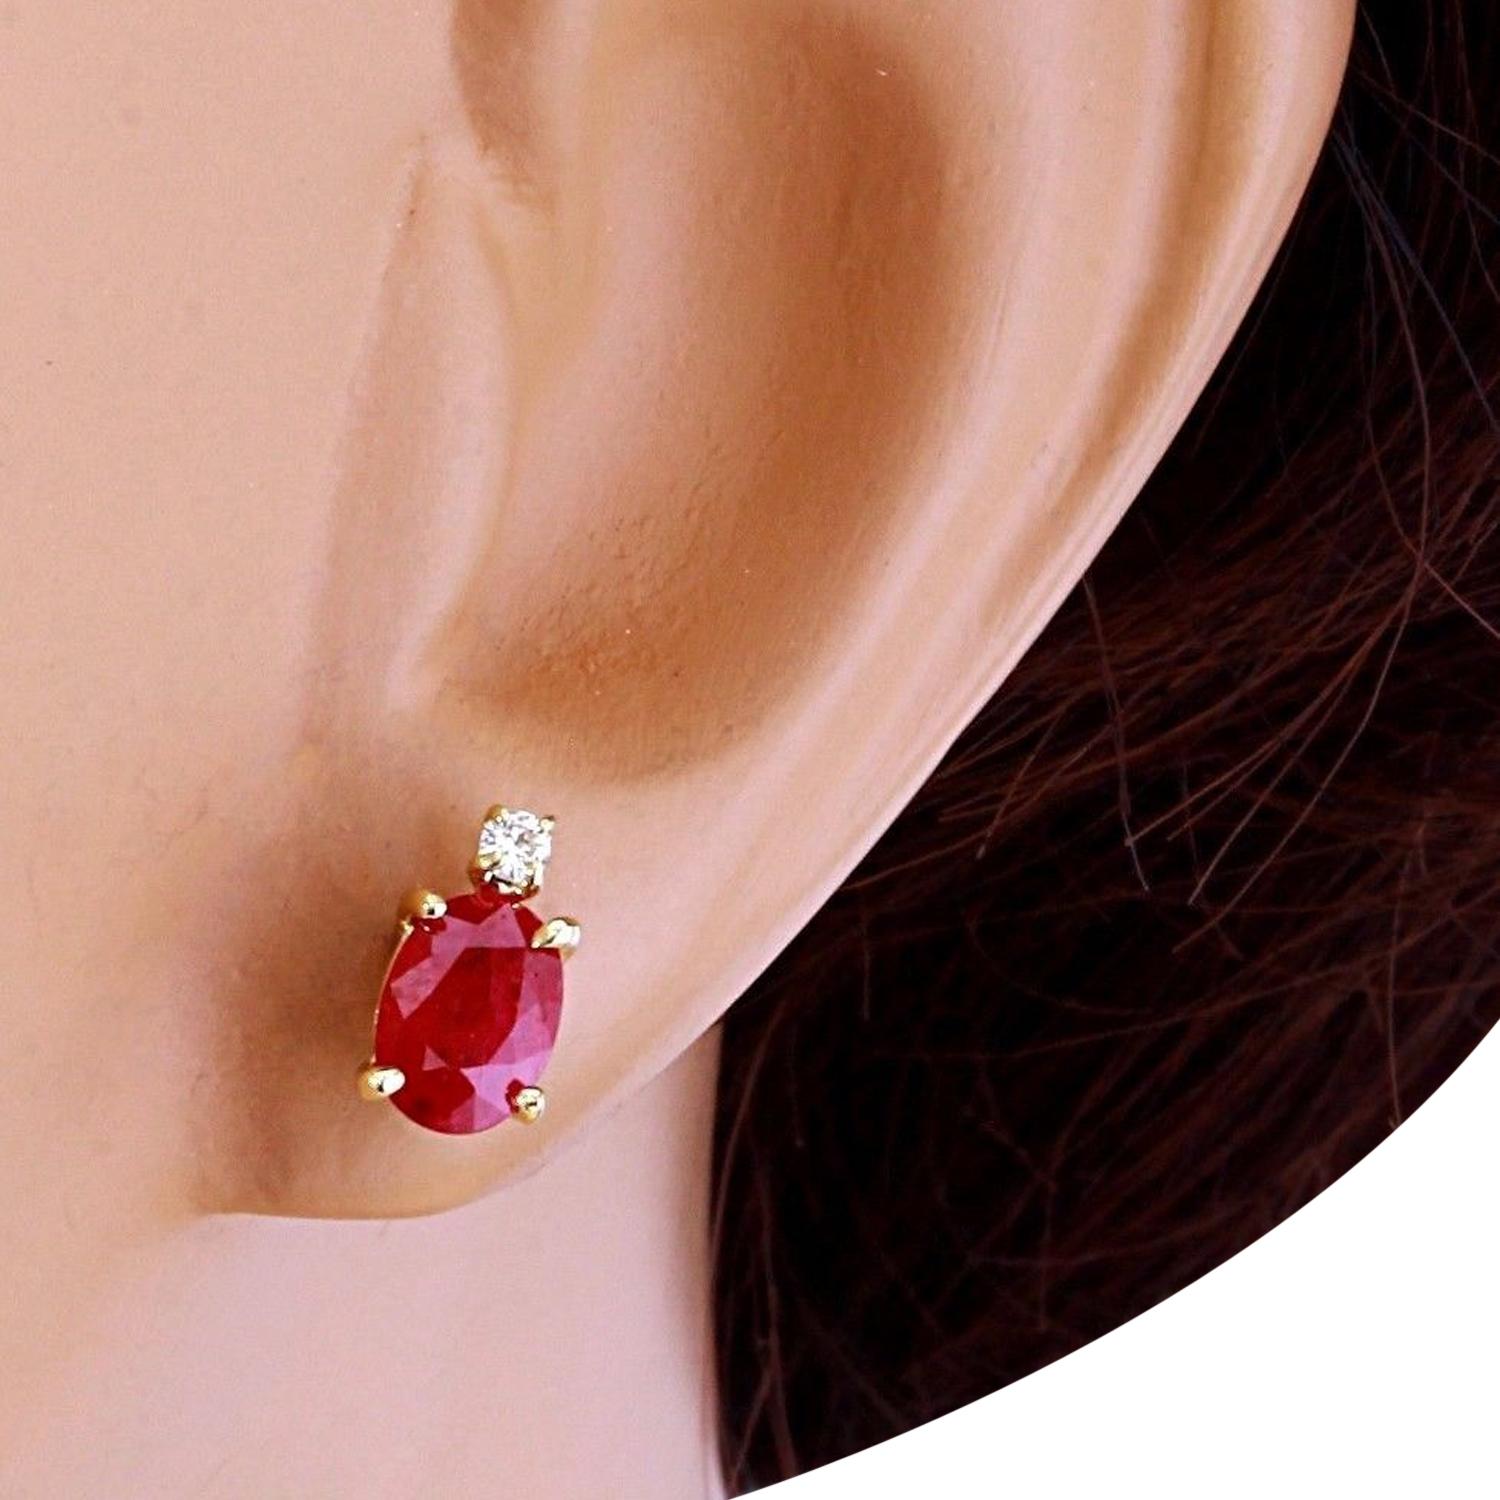 Women's 1.76 Carat Natural Ruby 14 Karat Solid Yellow Gold Diamond Stud Earrings For Sale